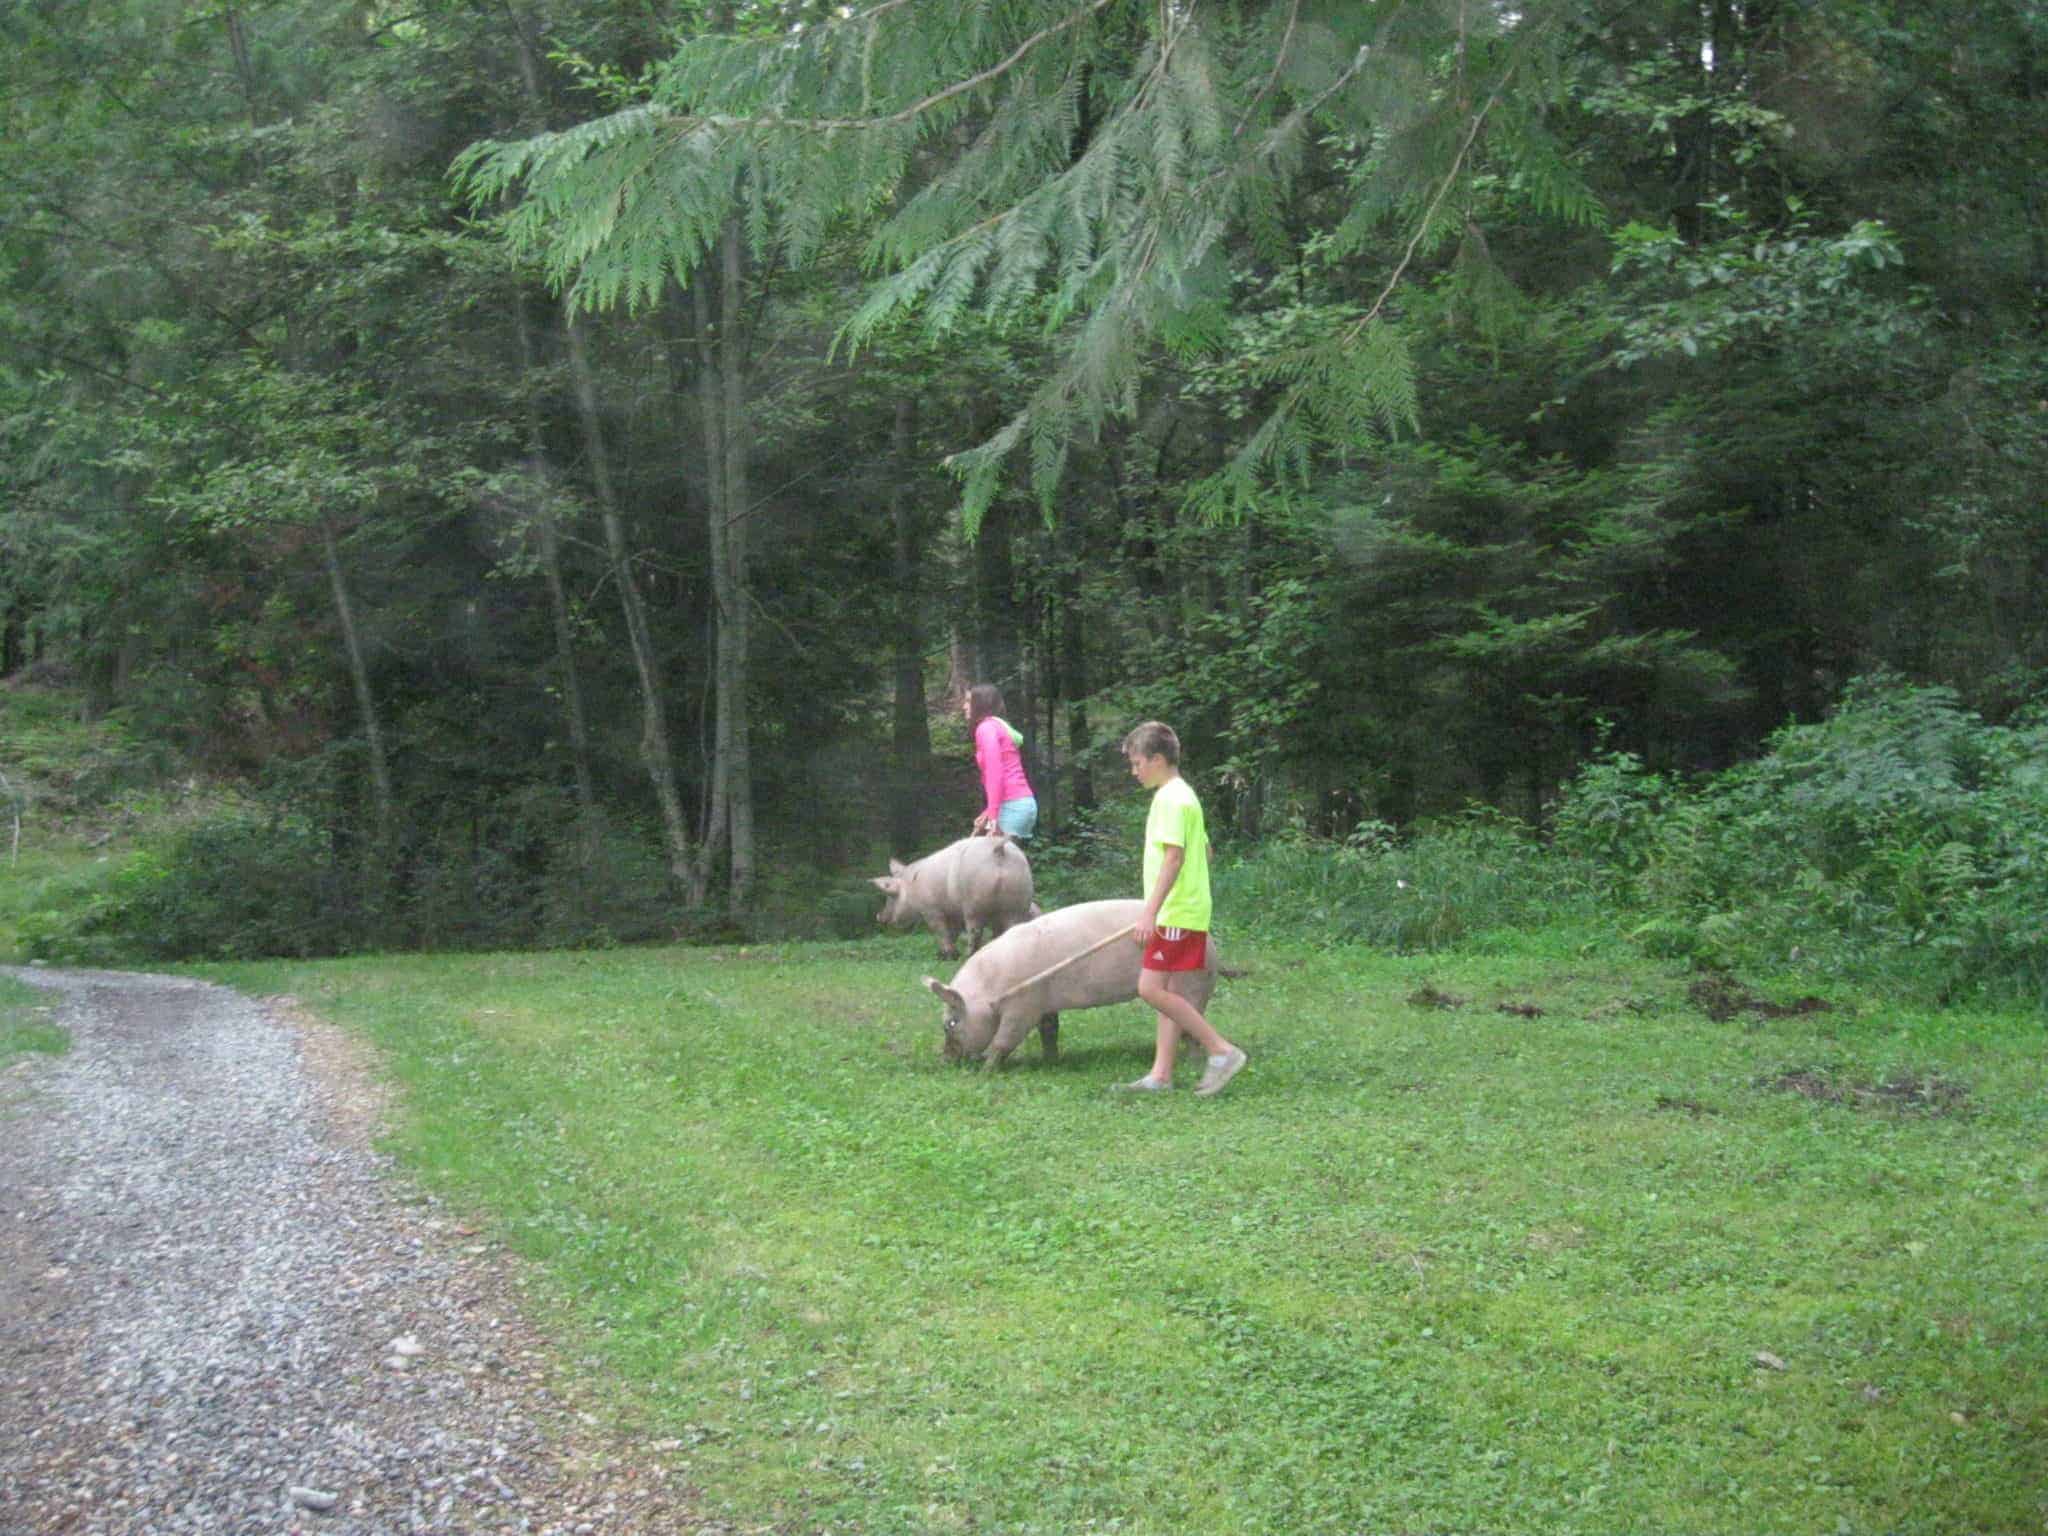 Kids out walking their pigs in a green grassy area.